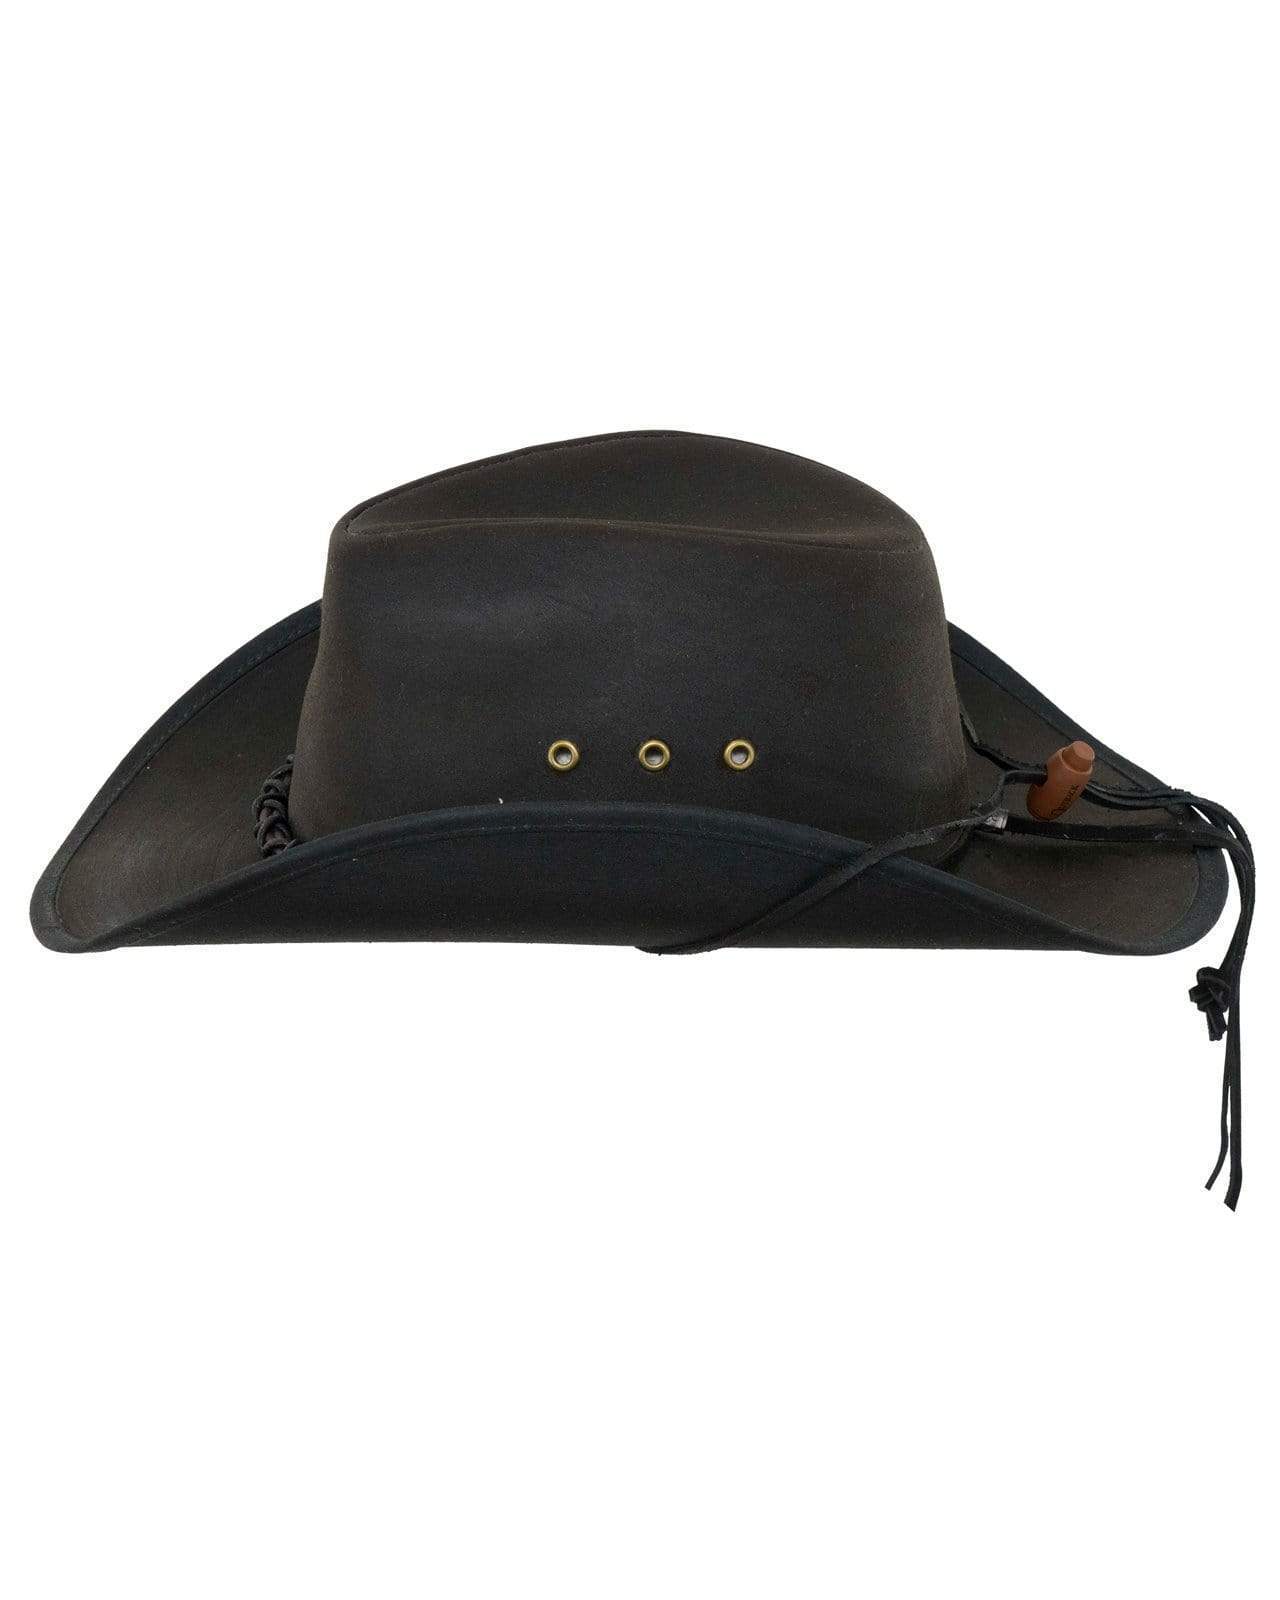 Bootlegger | Oilskin Hats by Outback Trading Company 